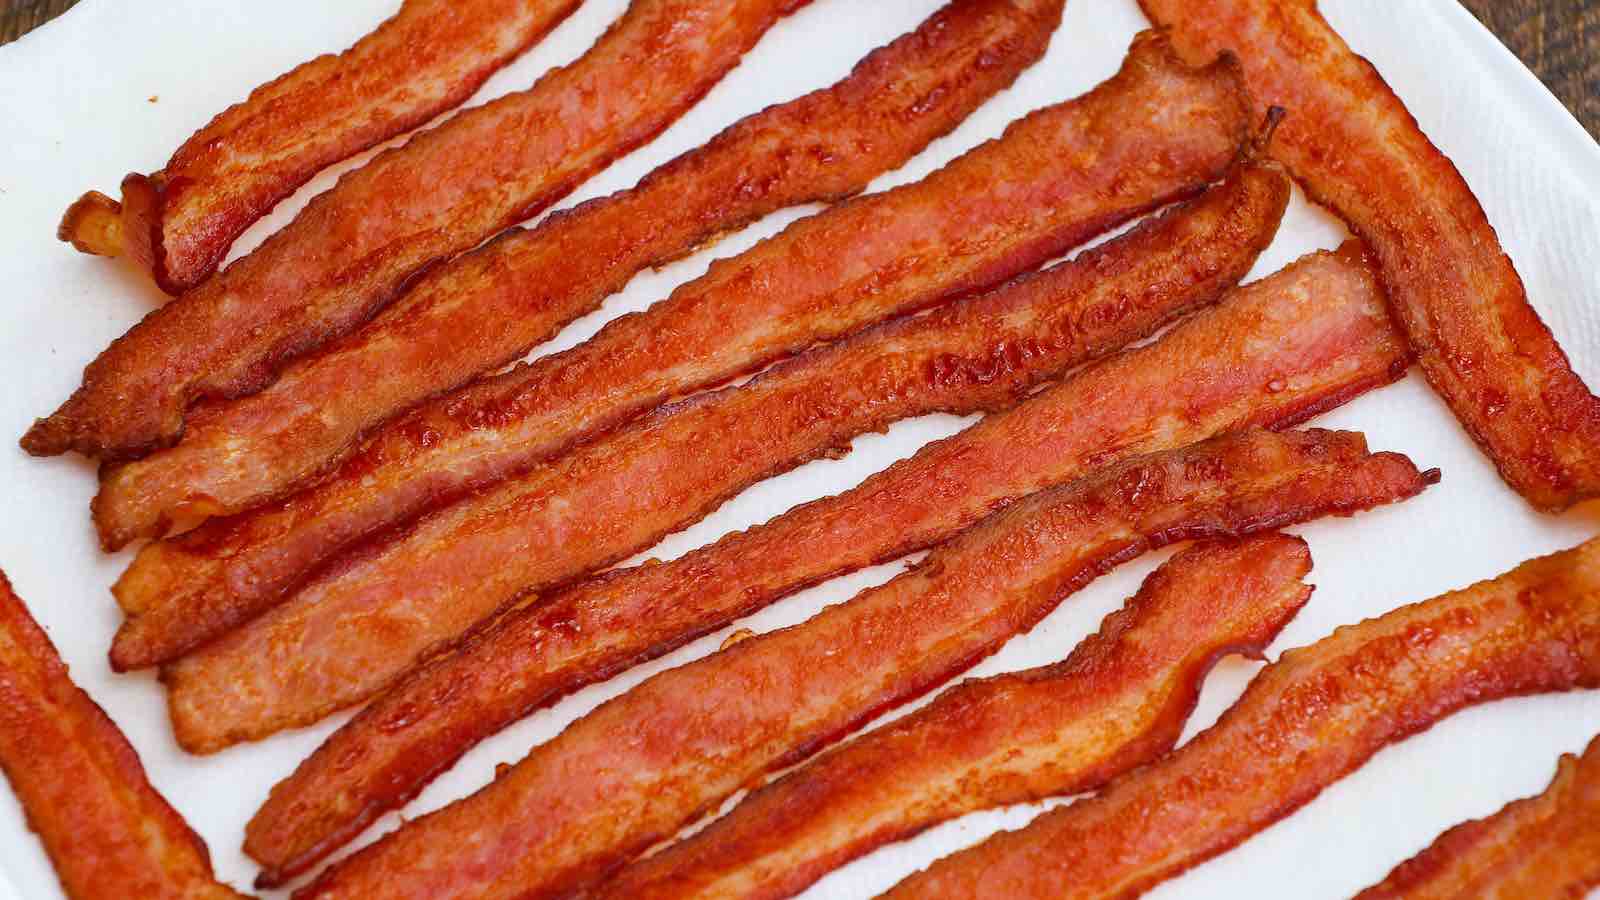 https://tipbuzz.com/wp-content/uploads/How-Long-to-Cook-Bacon-in-Oven-thumbnail.jpg